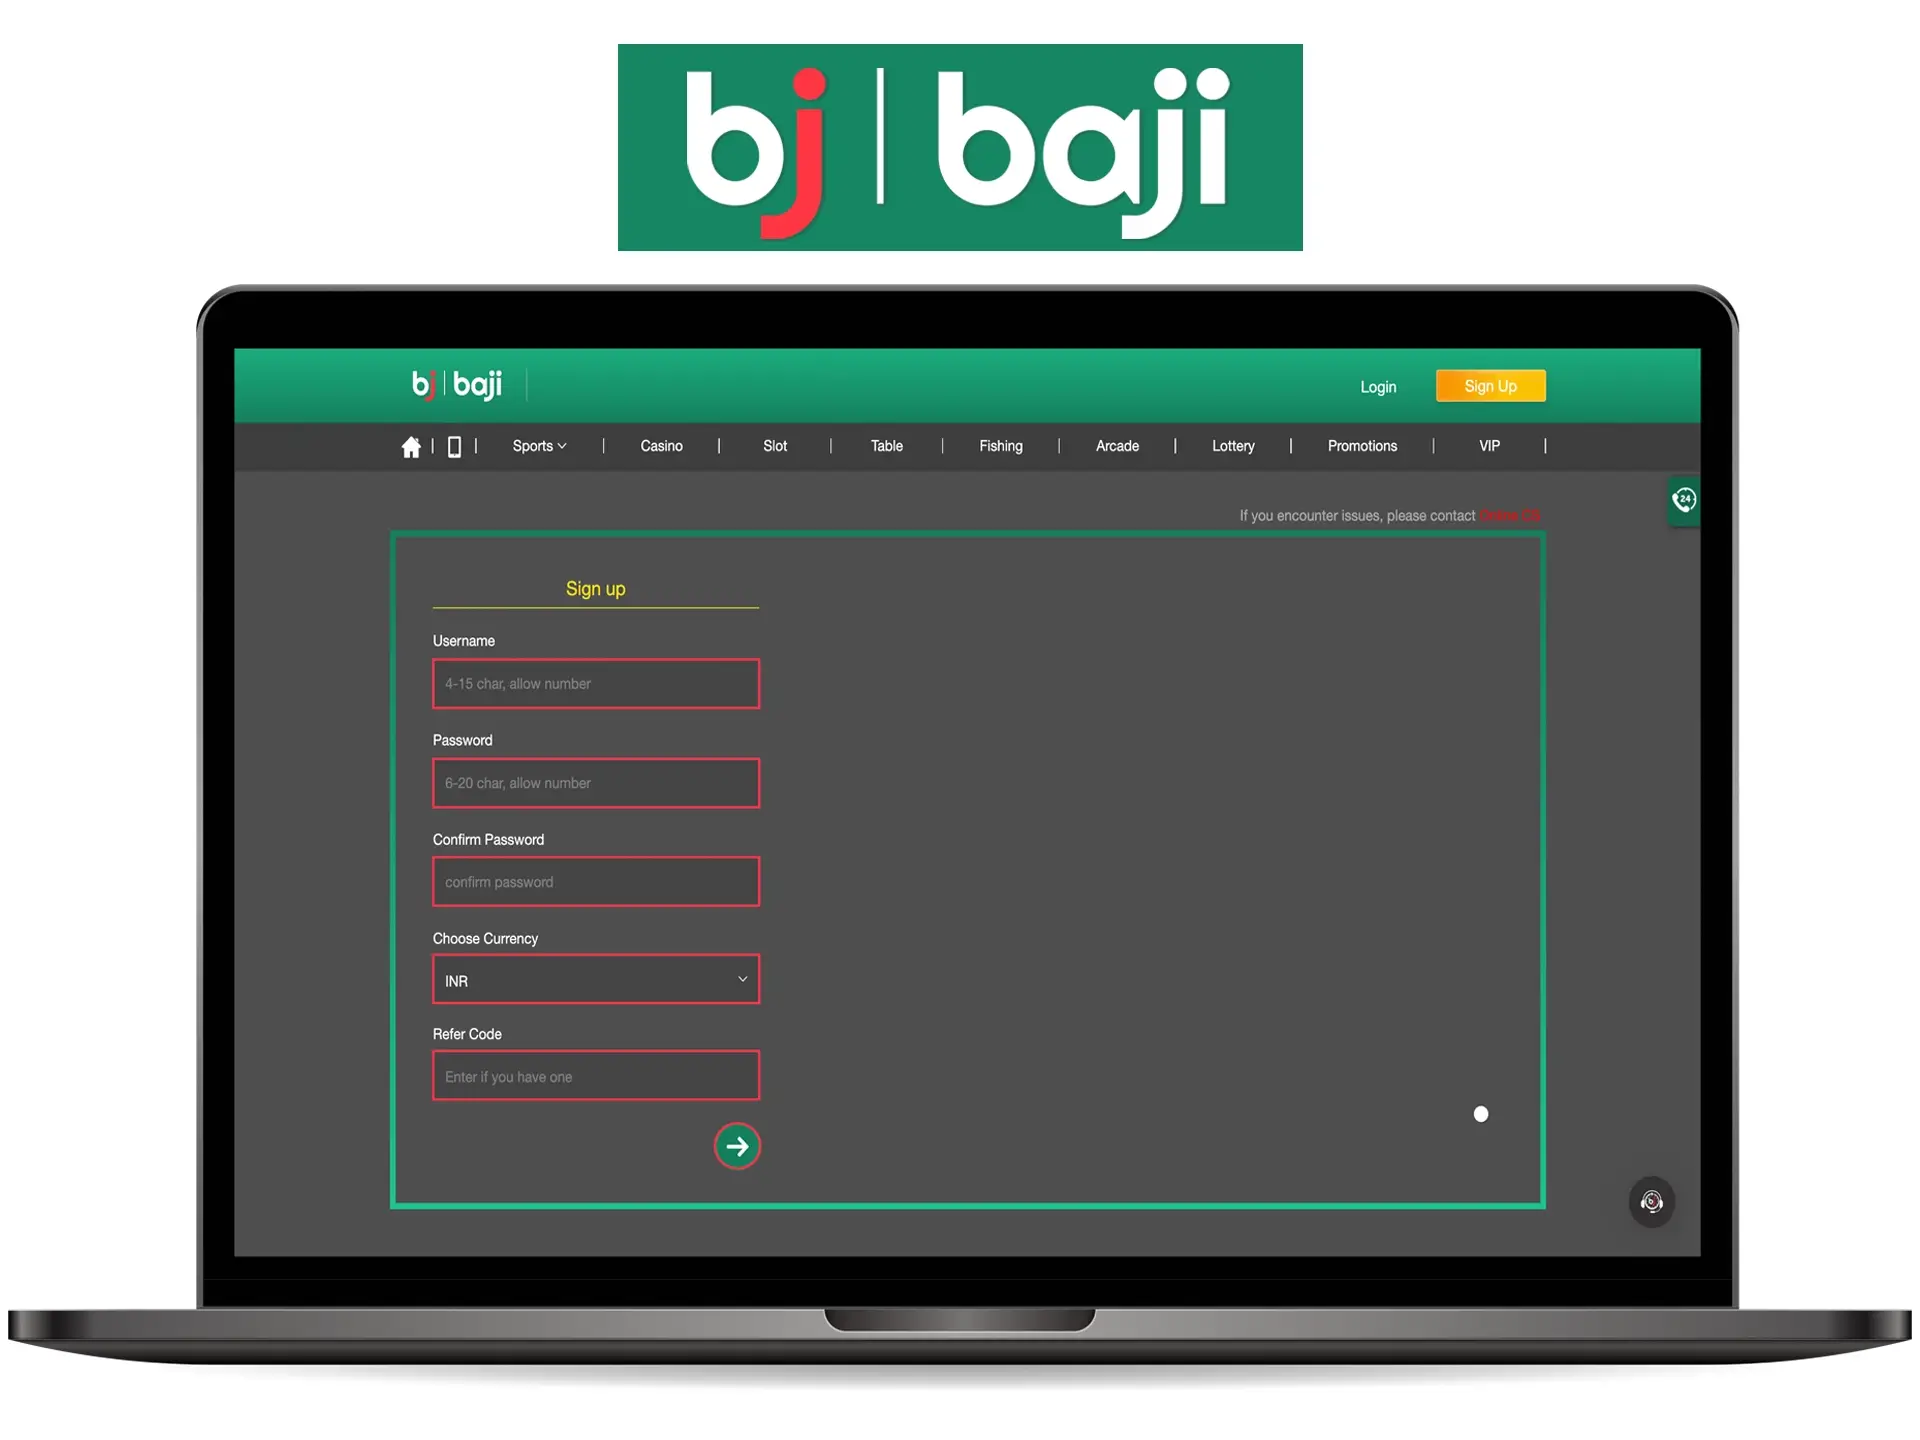 Enter your details in the registration form and get full access to your Baji gaming account.